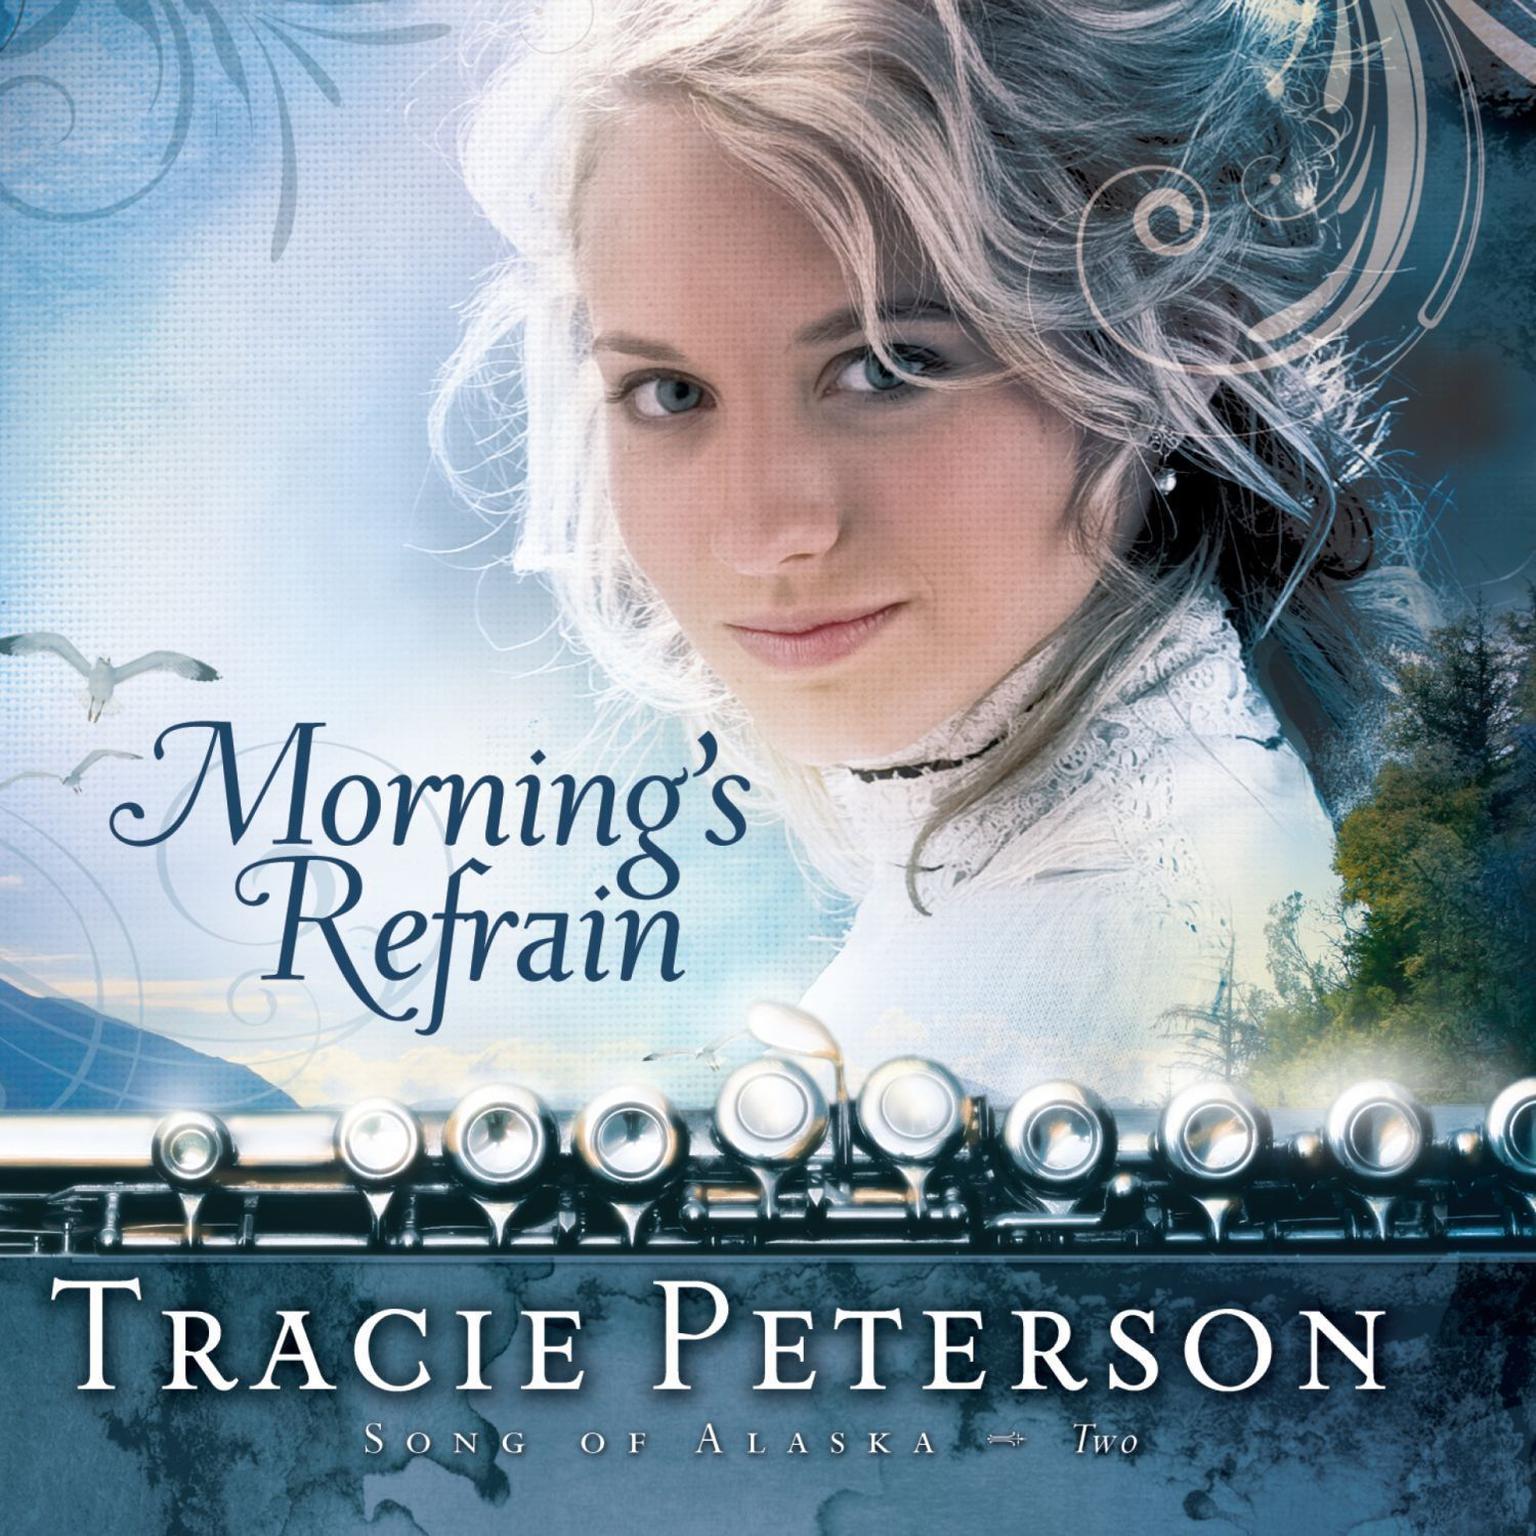 Mornings Refrain (Abridged) Audiobook, by Tracie Peterson